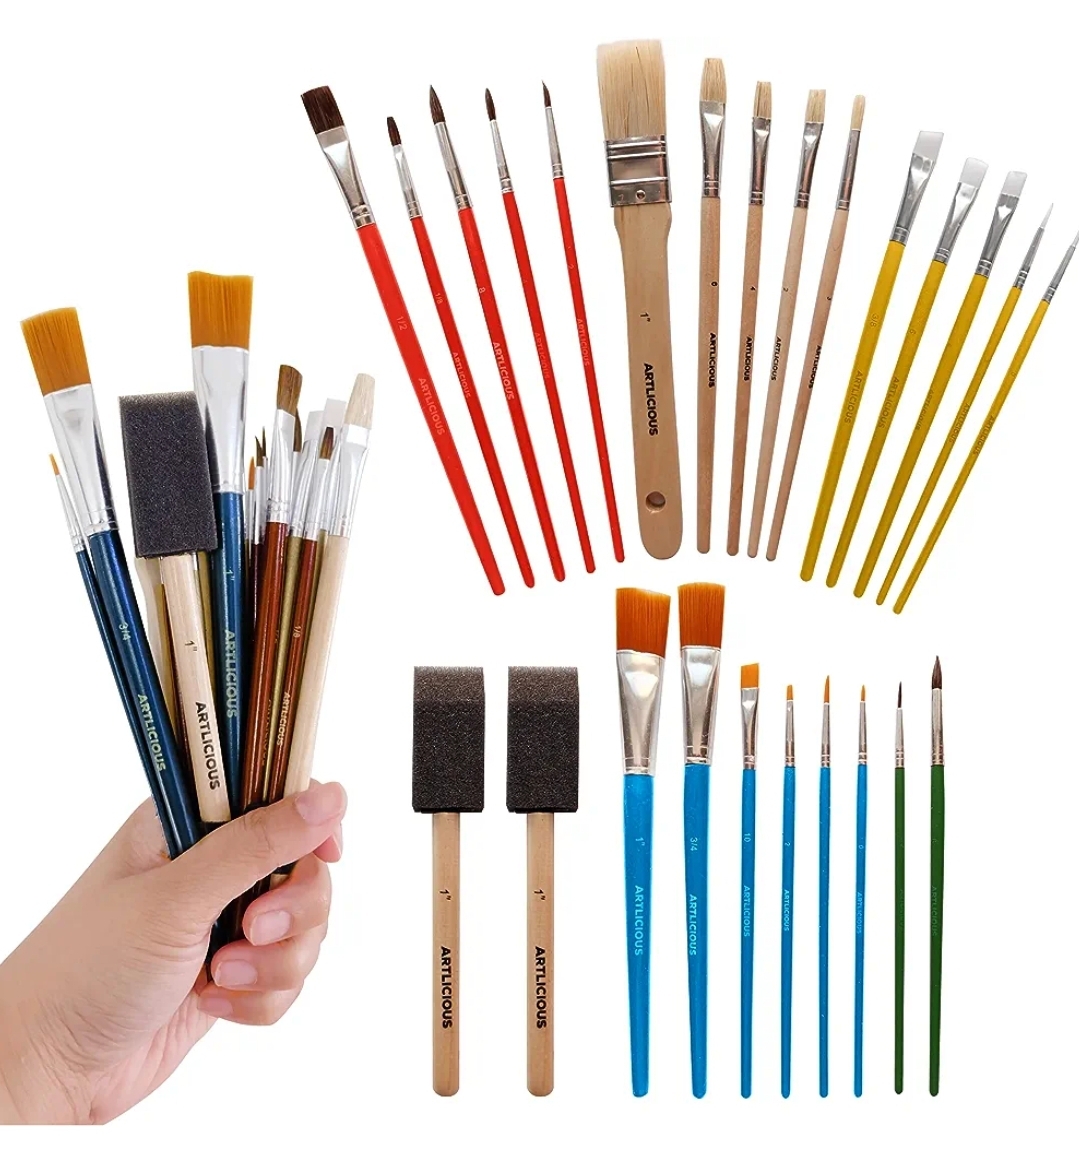 Artlicious Paint Brushes - Acrylic Paint Set and Detail Paint Brushes for Kids - Use with Craft, Watercolor, Oil, Gouache Paints, Face Art, Washable Paints, Miniature Detailing and Rock Painting画笔